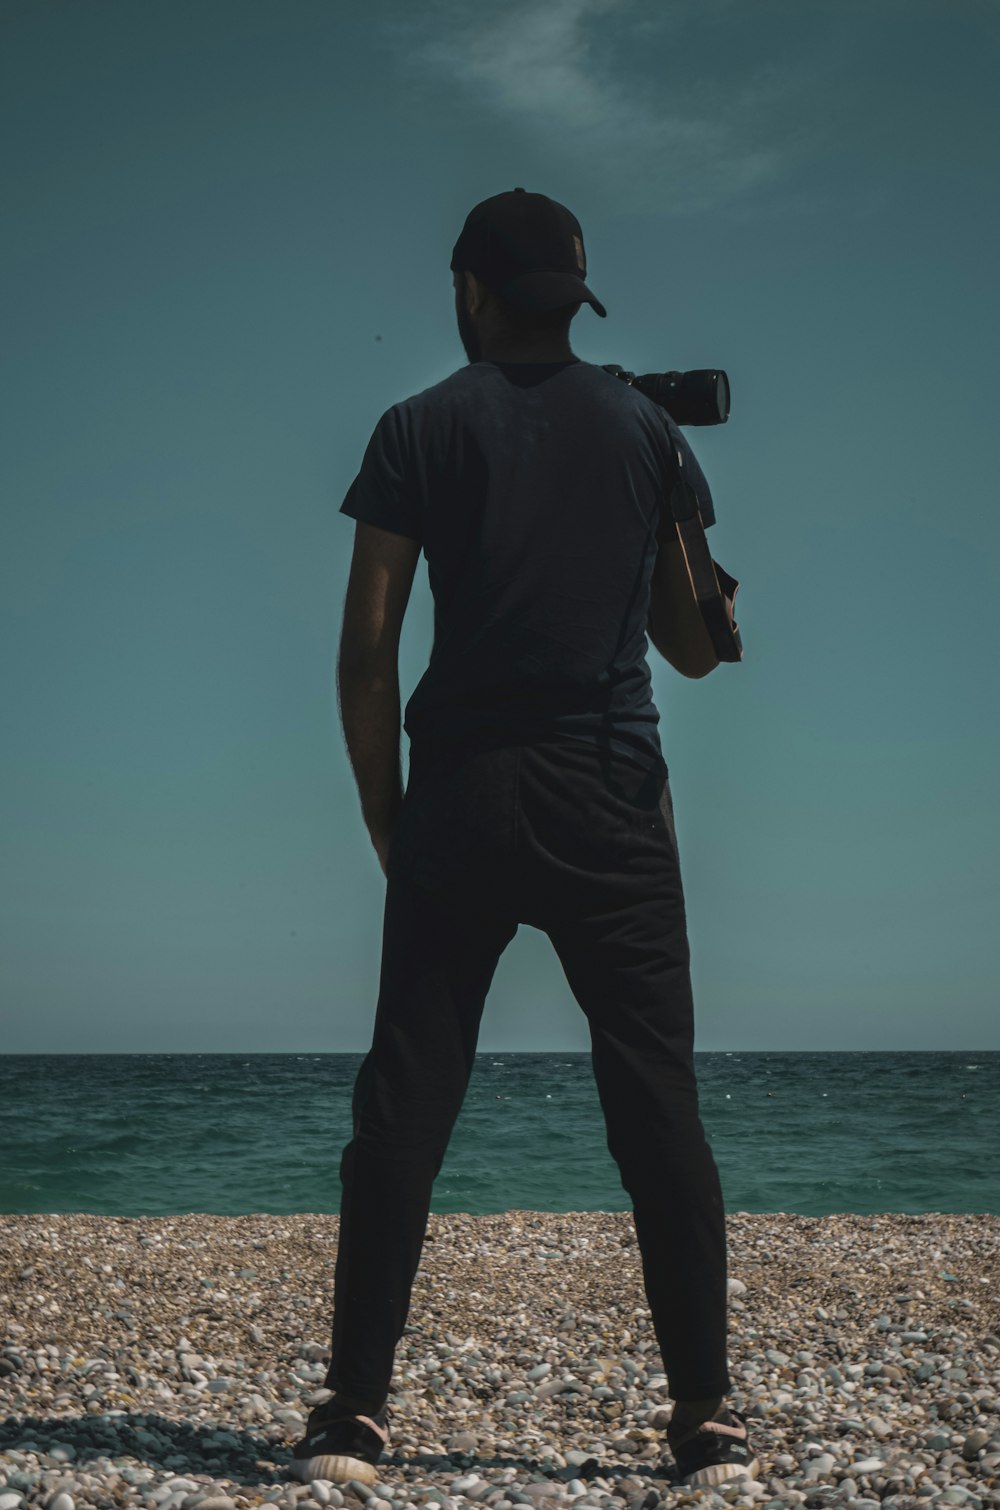 man in black t-shirt and black pants holding black dslr camera standing on beach during